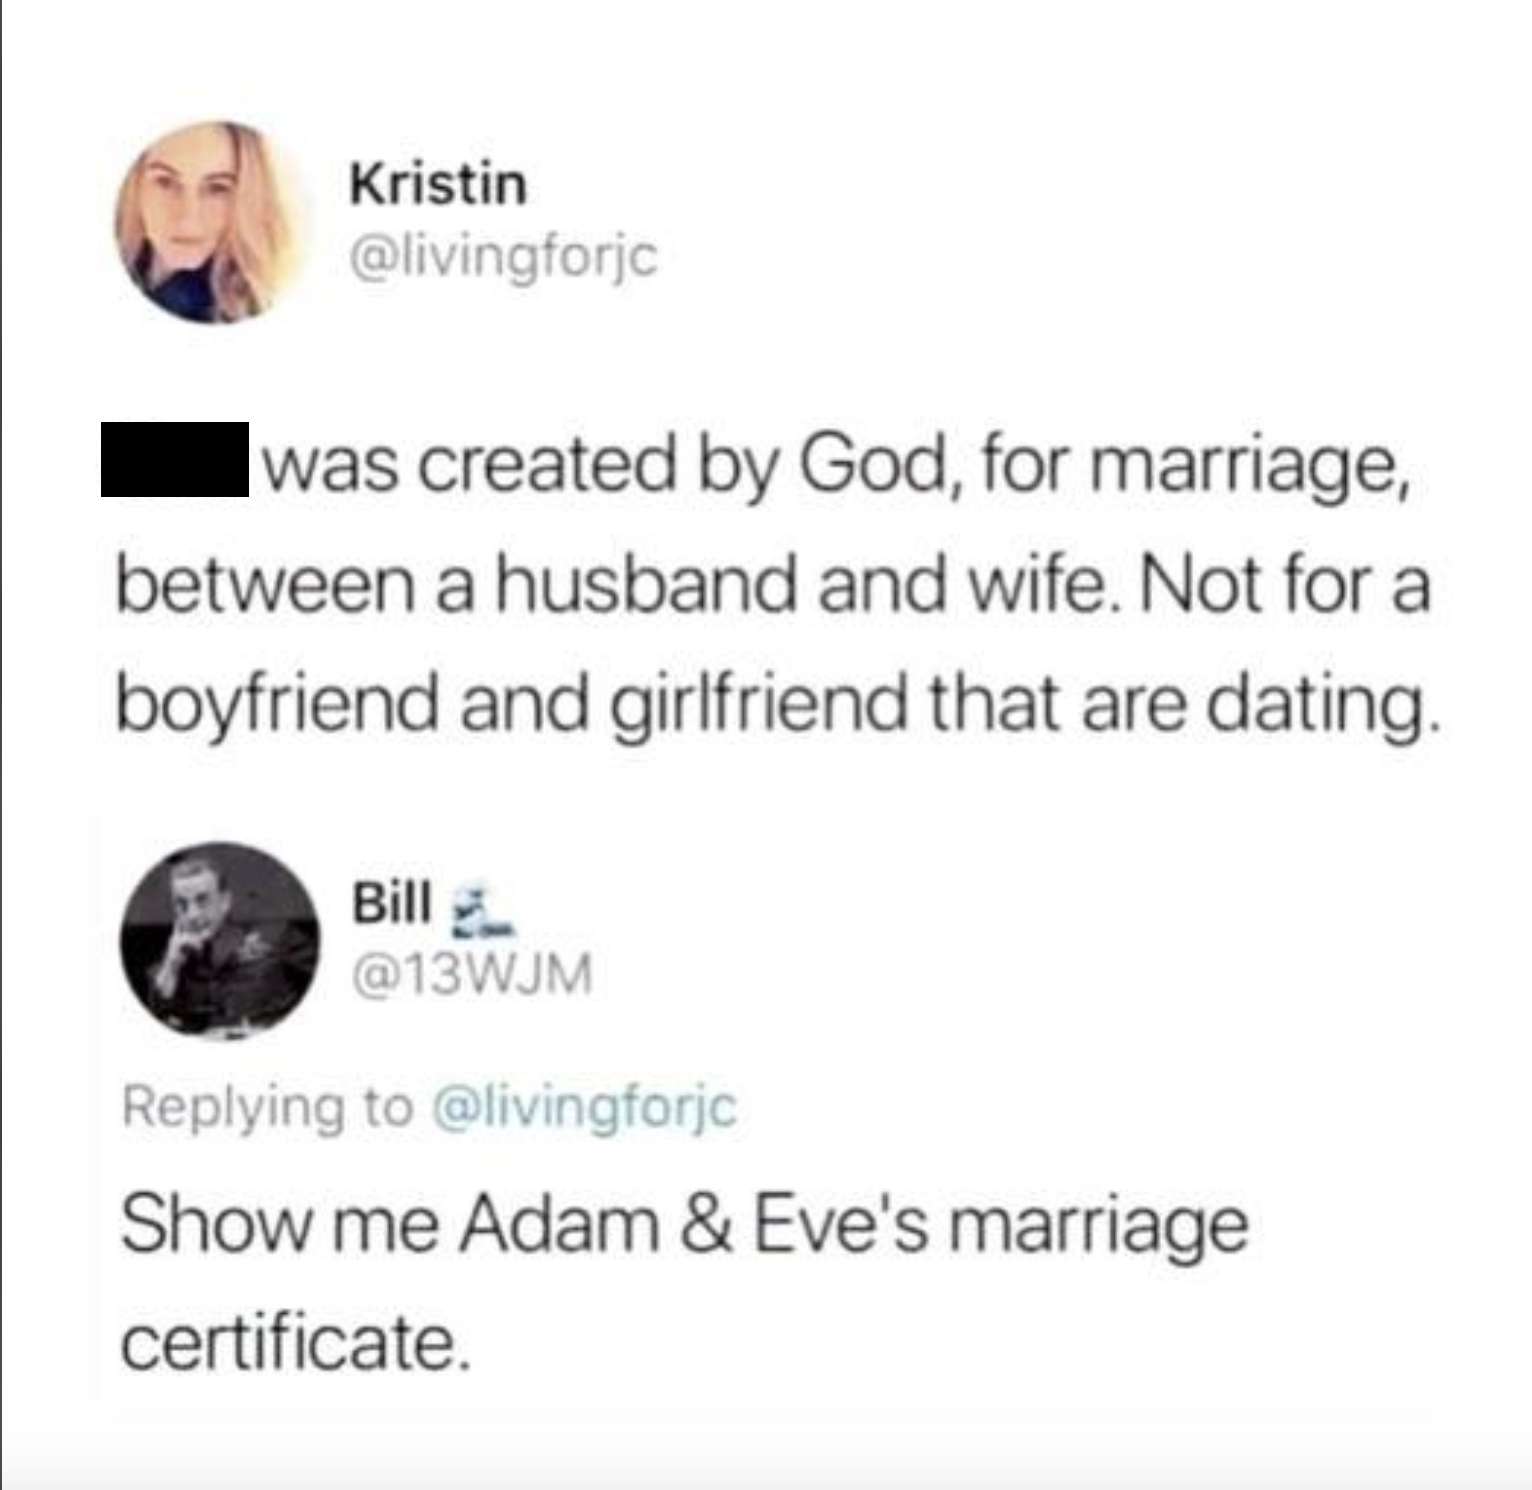 screenshot - Kristin was created by God, for marriage, between a husband and wife. Not for a boyfriend and girlfriend that are dating. Bill Show me Adam & Eve's marriage certificate.